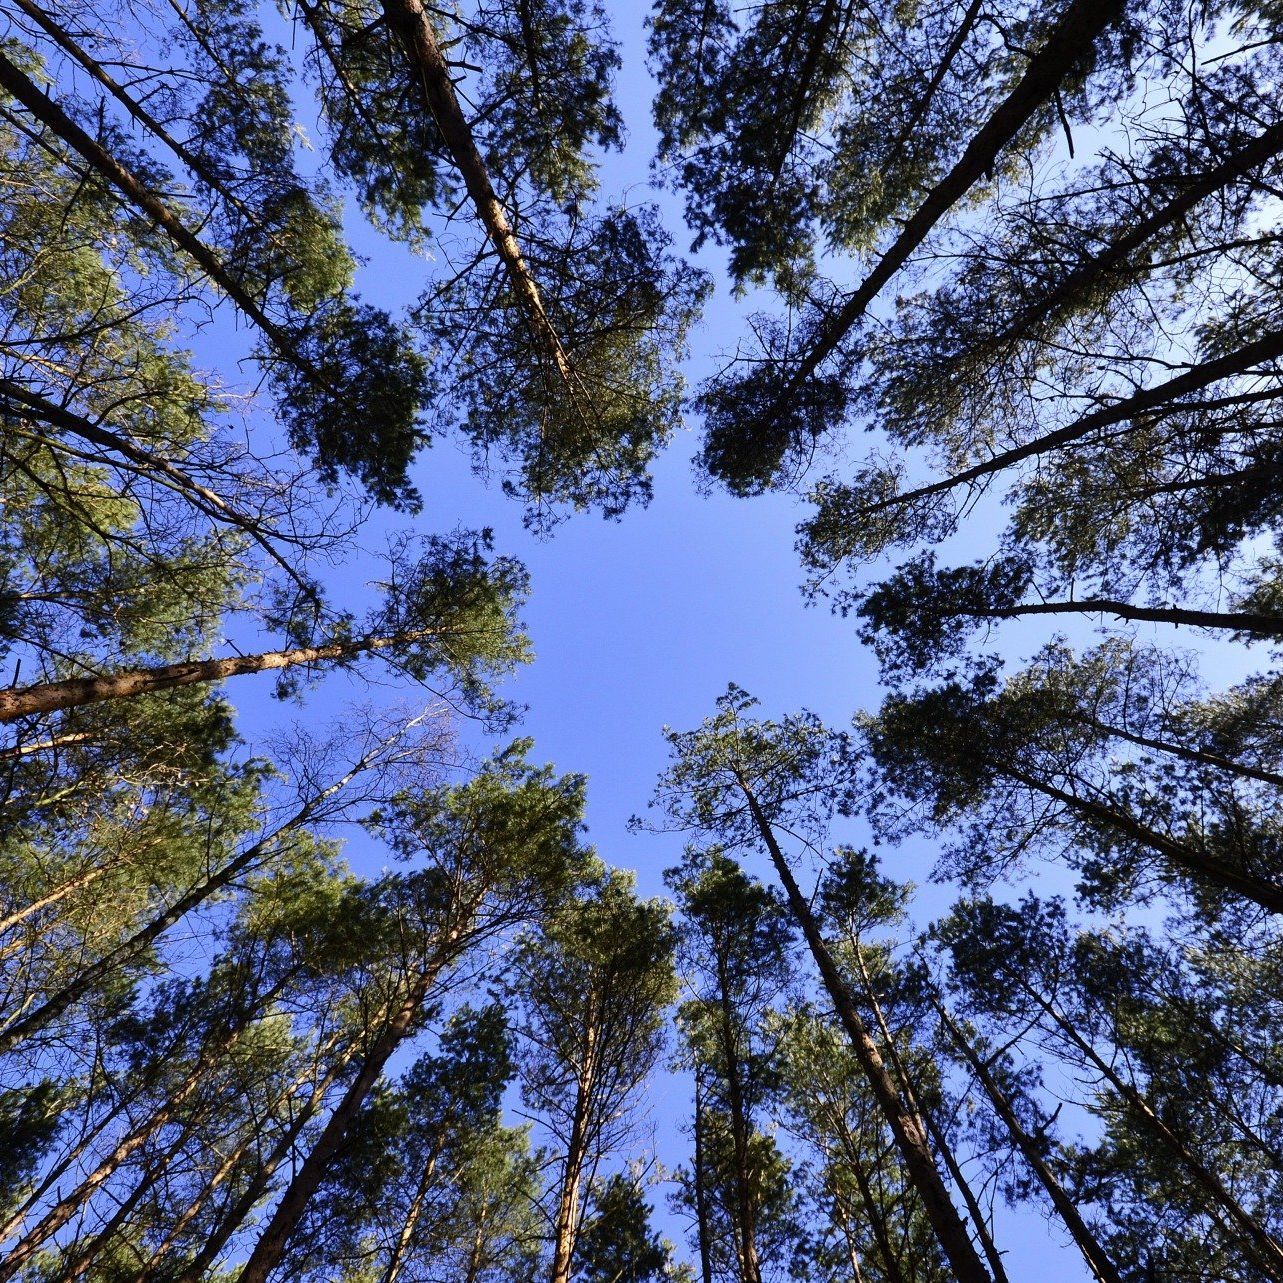 looking up at the sky through a forest of pine trees